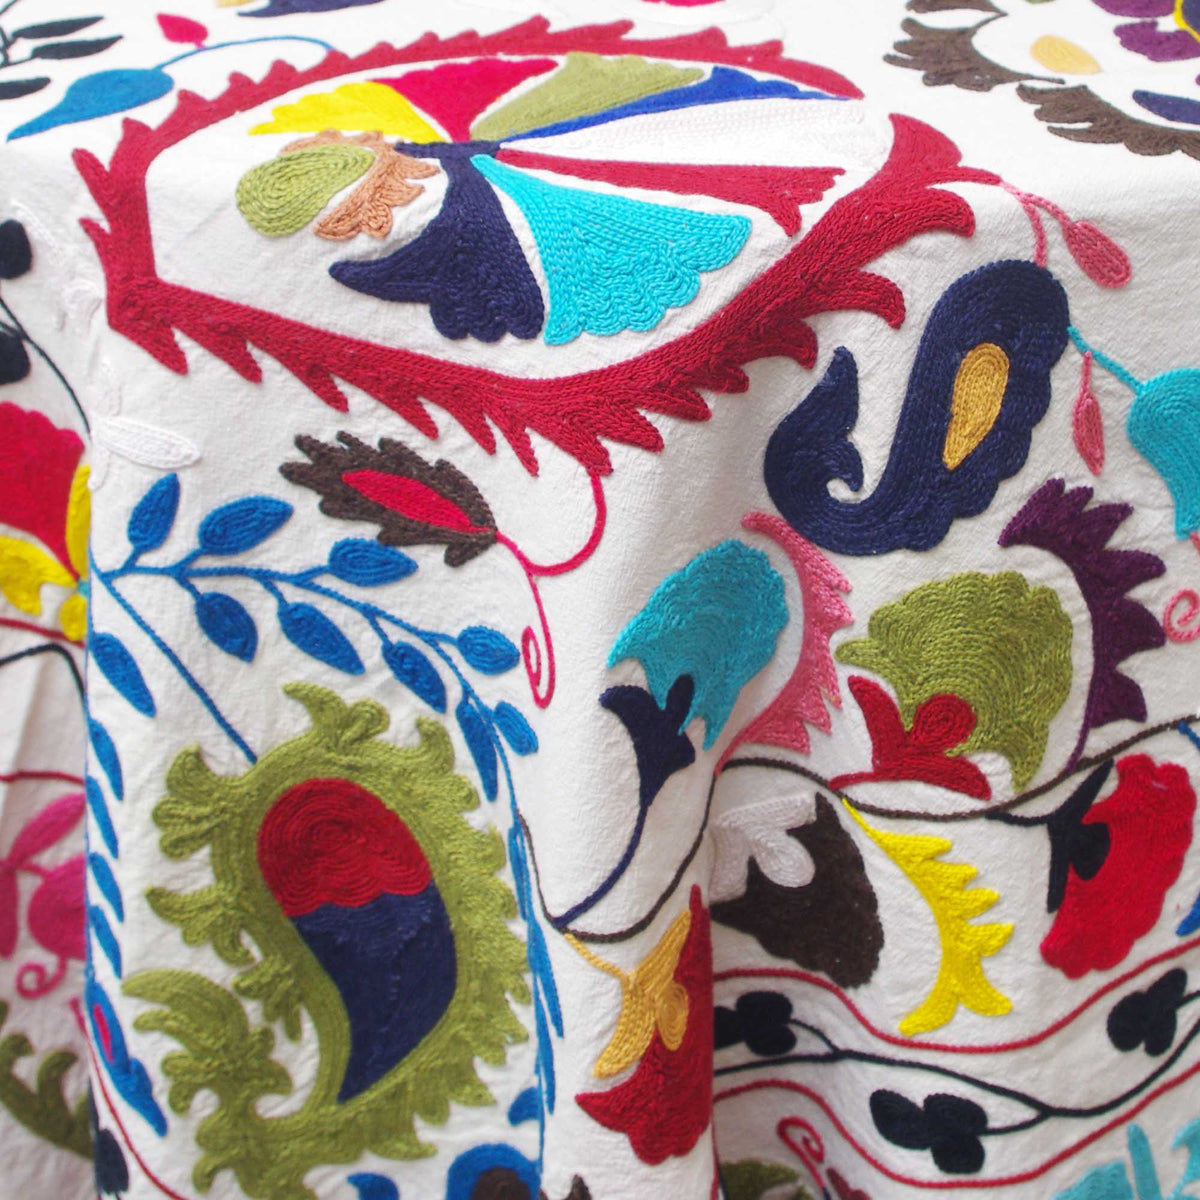 Uzbek Suzani Bedspread With Embroidery - Paisley Floral